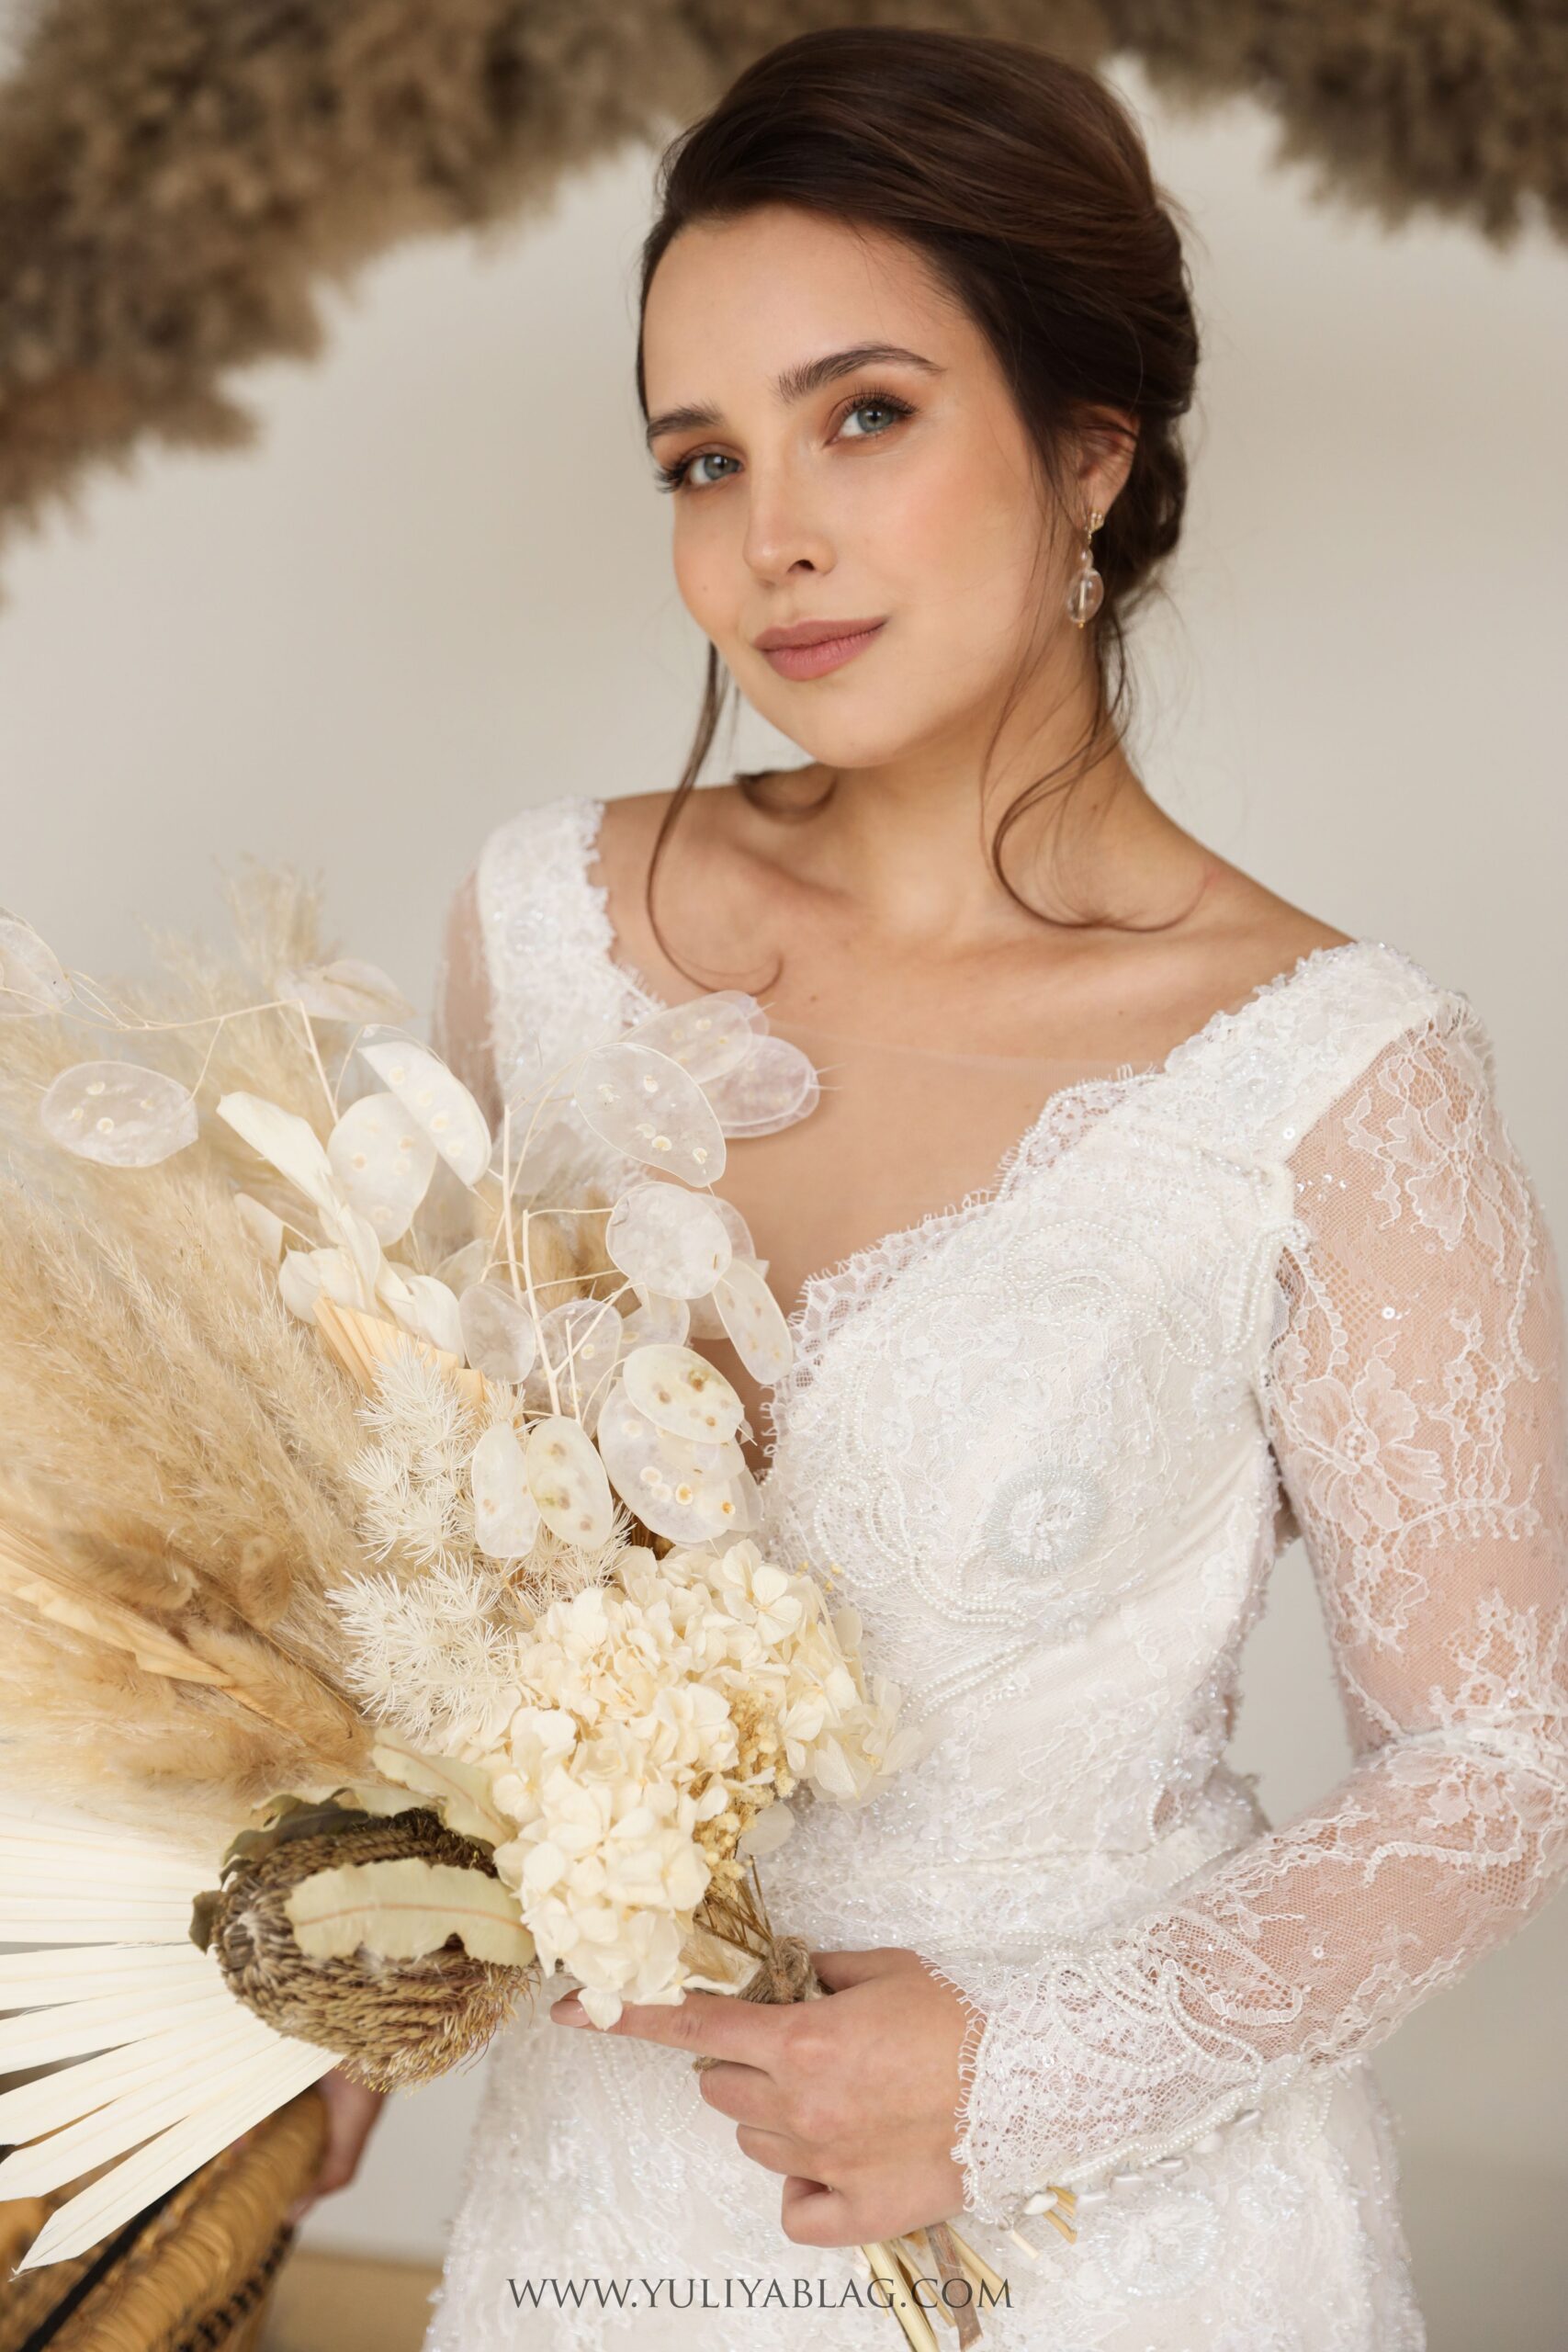 A portrait of a bride in Montreal, her bridal makeup soft and natural, holding a unique bouquet of dried flowers and pampas grass, with her lace gown adding a touch of timeless elegance